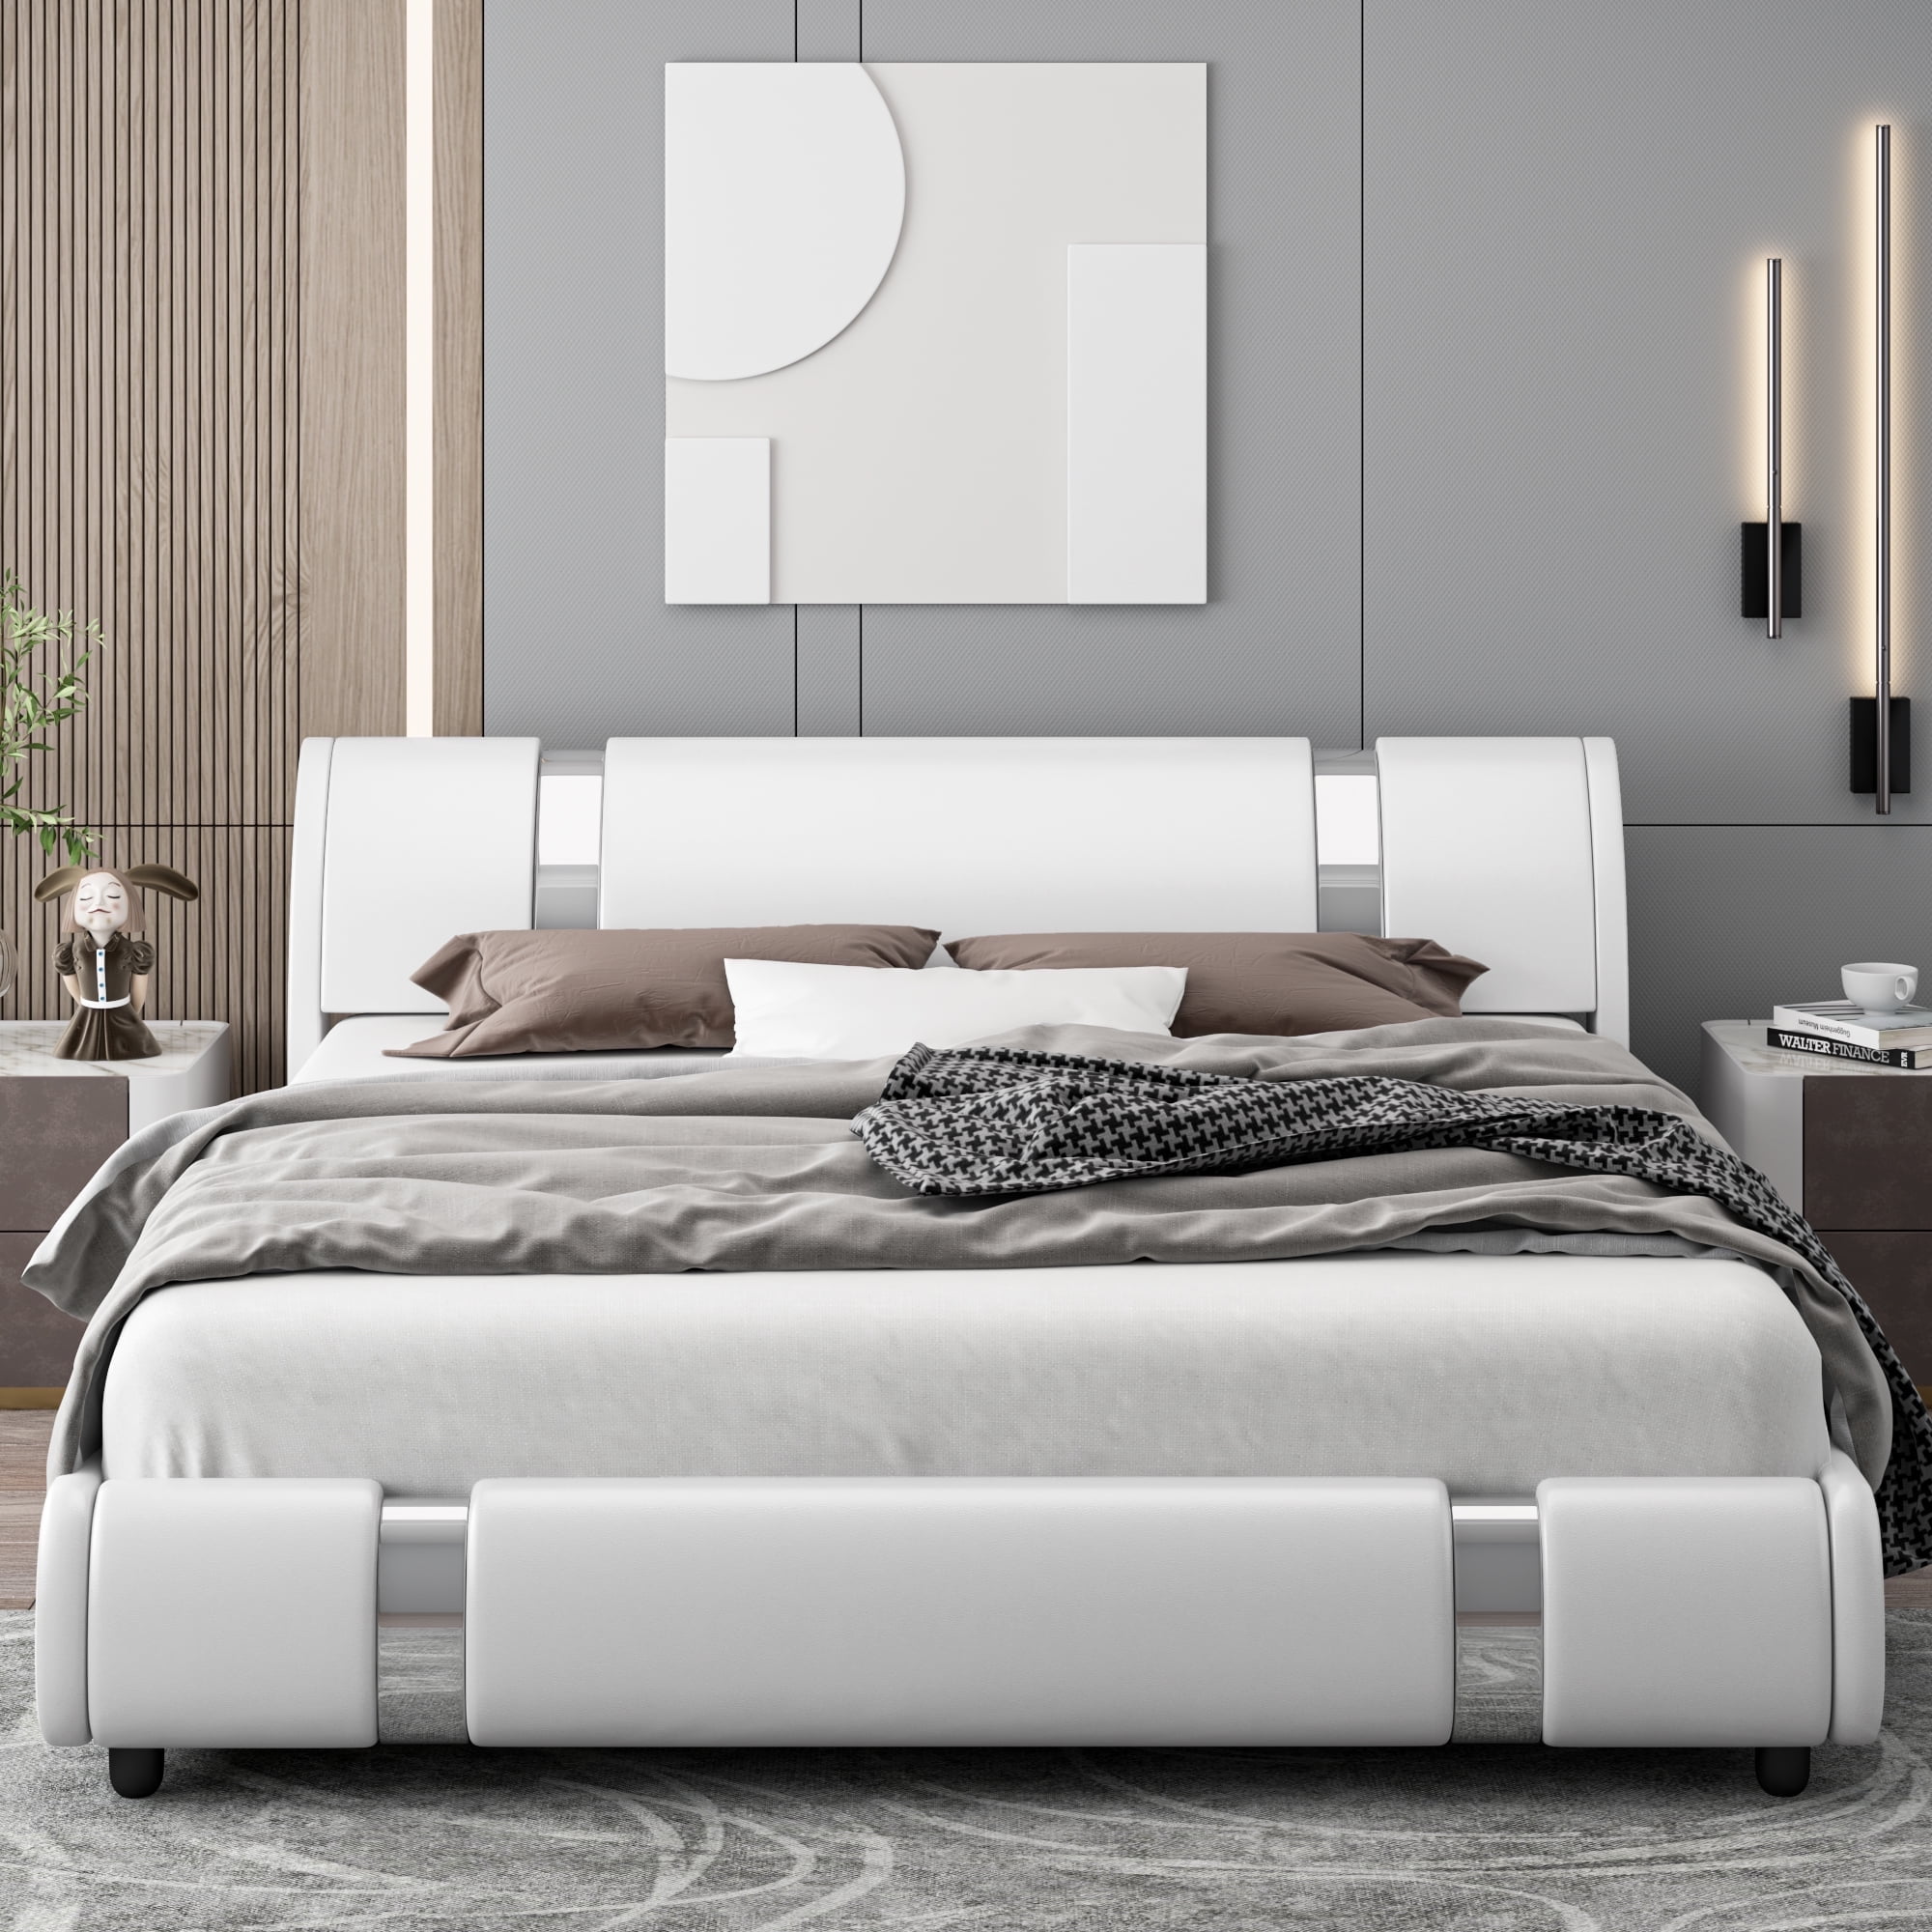 Homfa Full Size Bed Frame, Modern Leather Upholstered Platform Bed Frame with Adjustable White Headboard, No Box Spring Needed - image 1 of 8